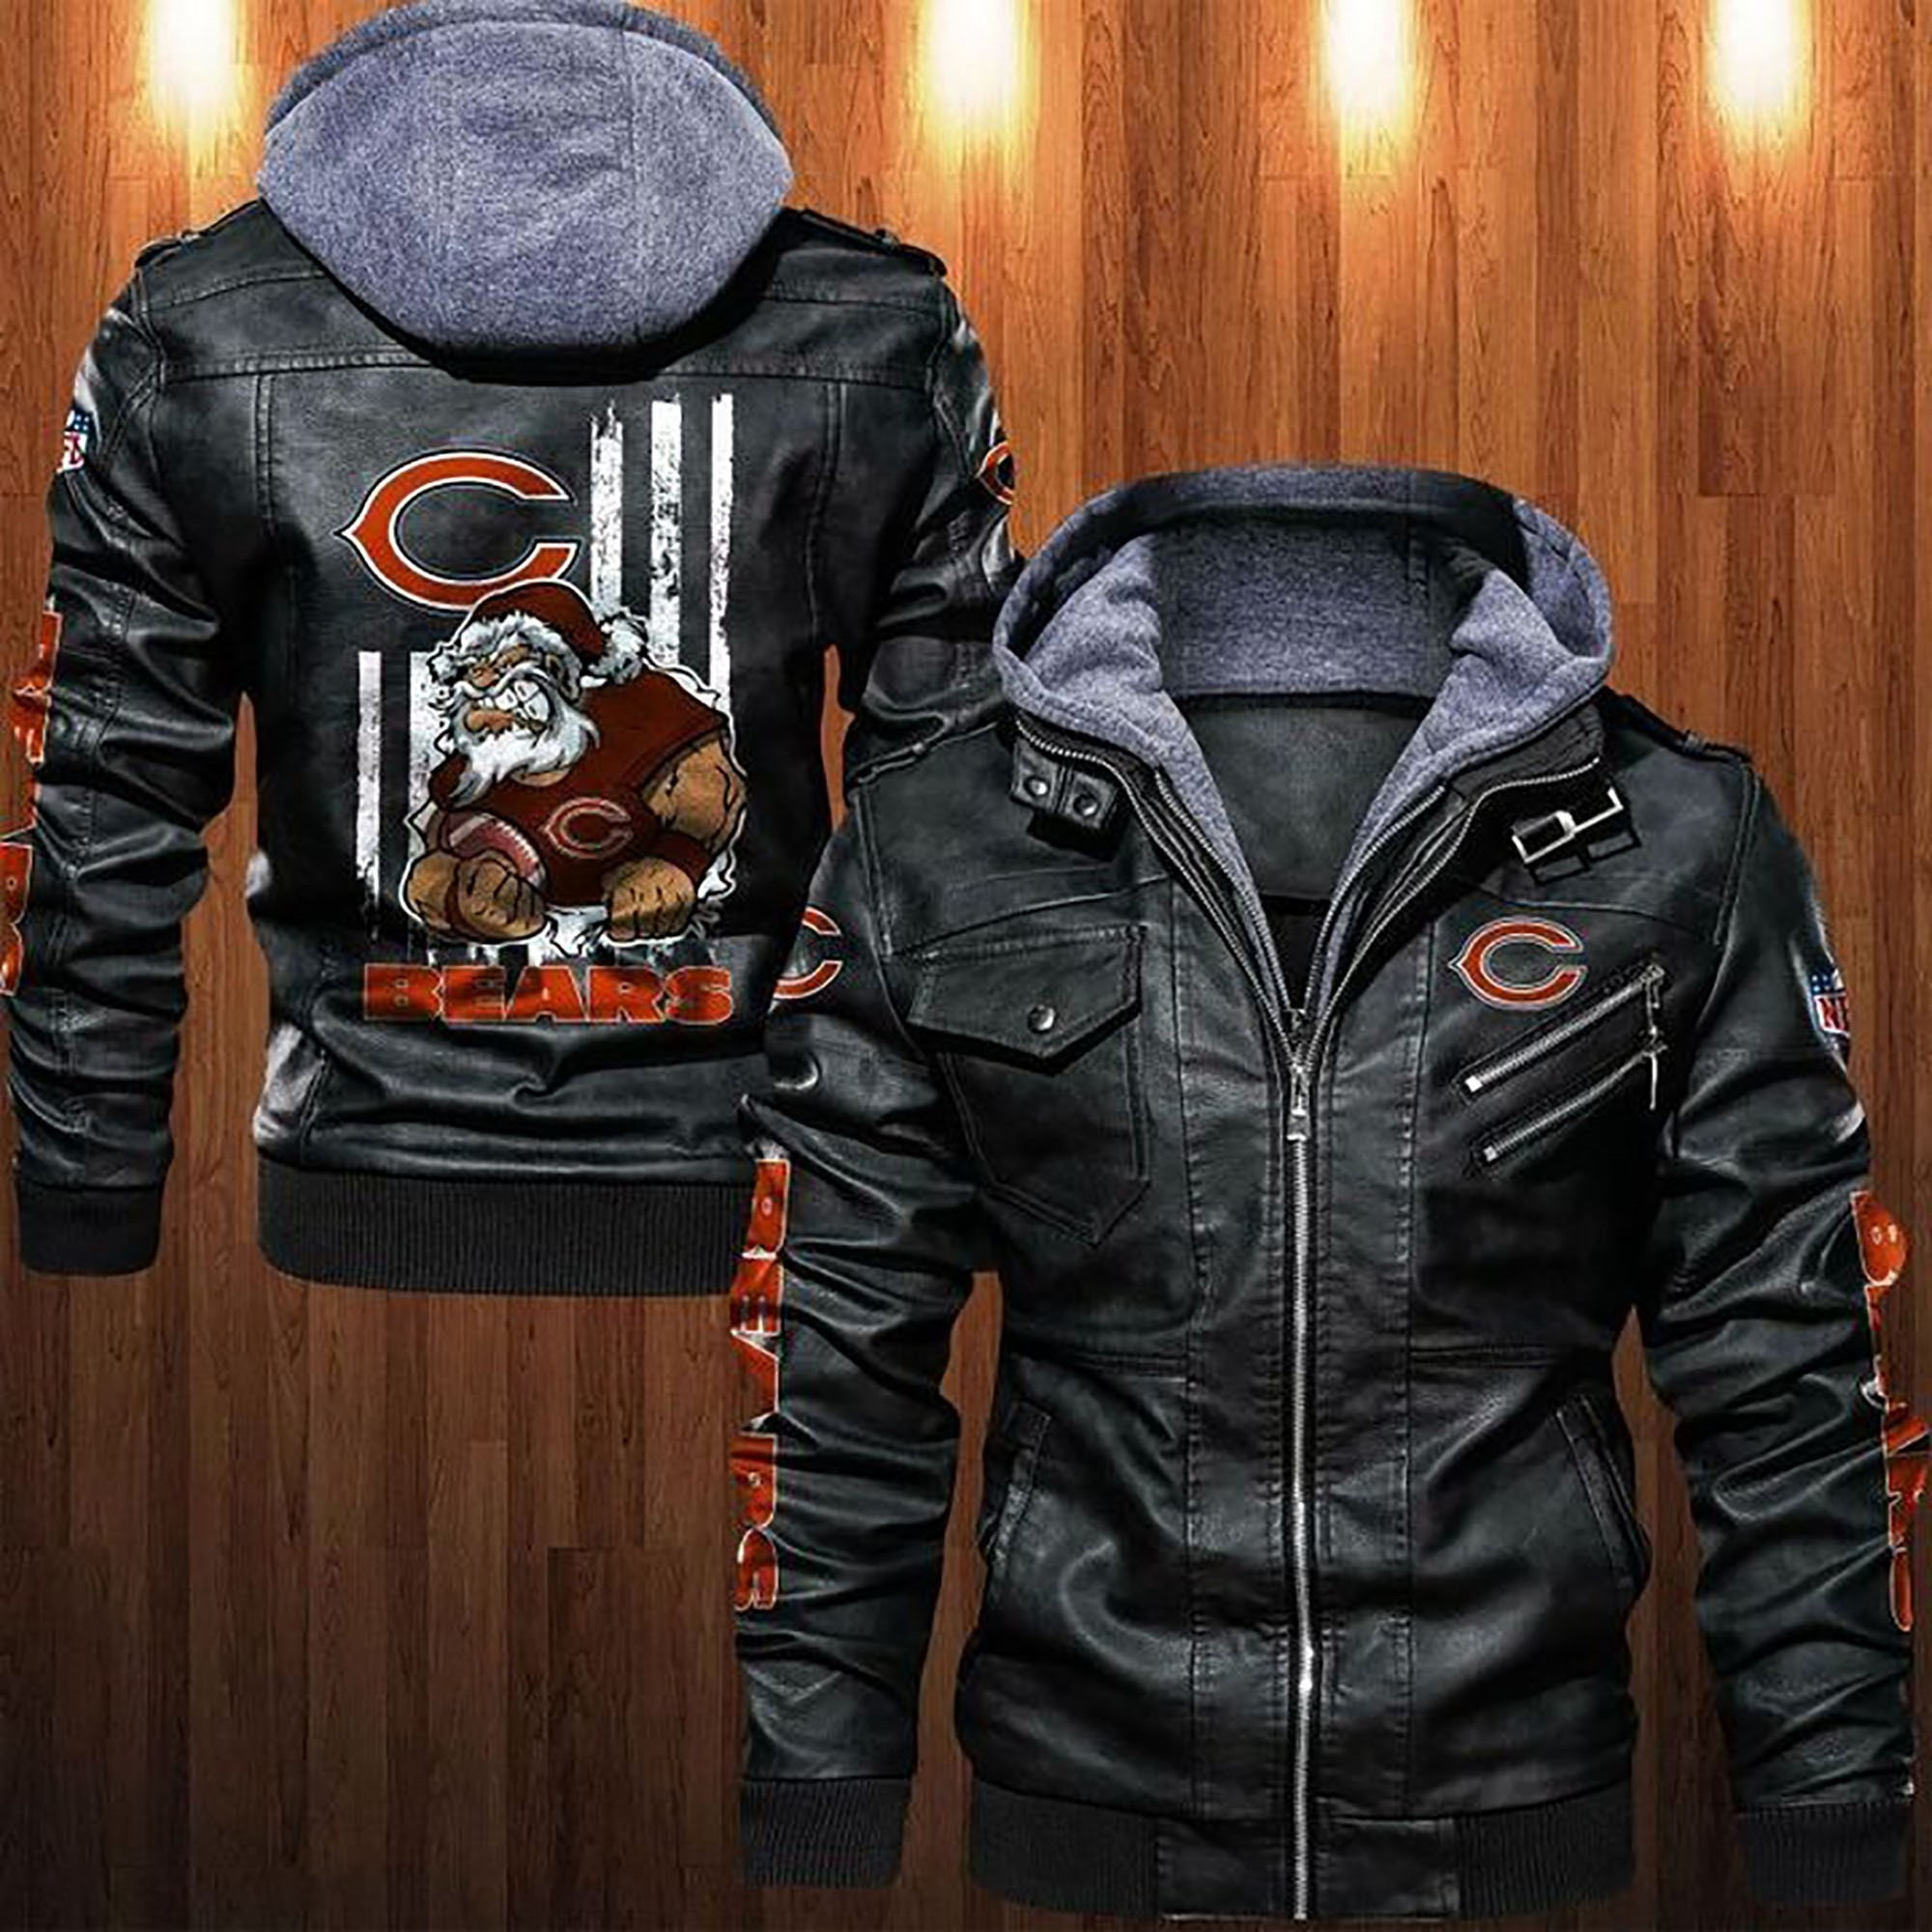 These Amazing Leather Jacket will add to the appeal of your outfit 169